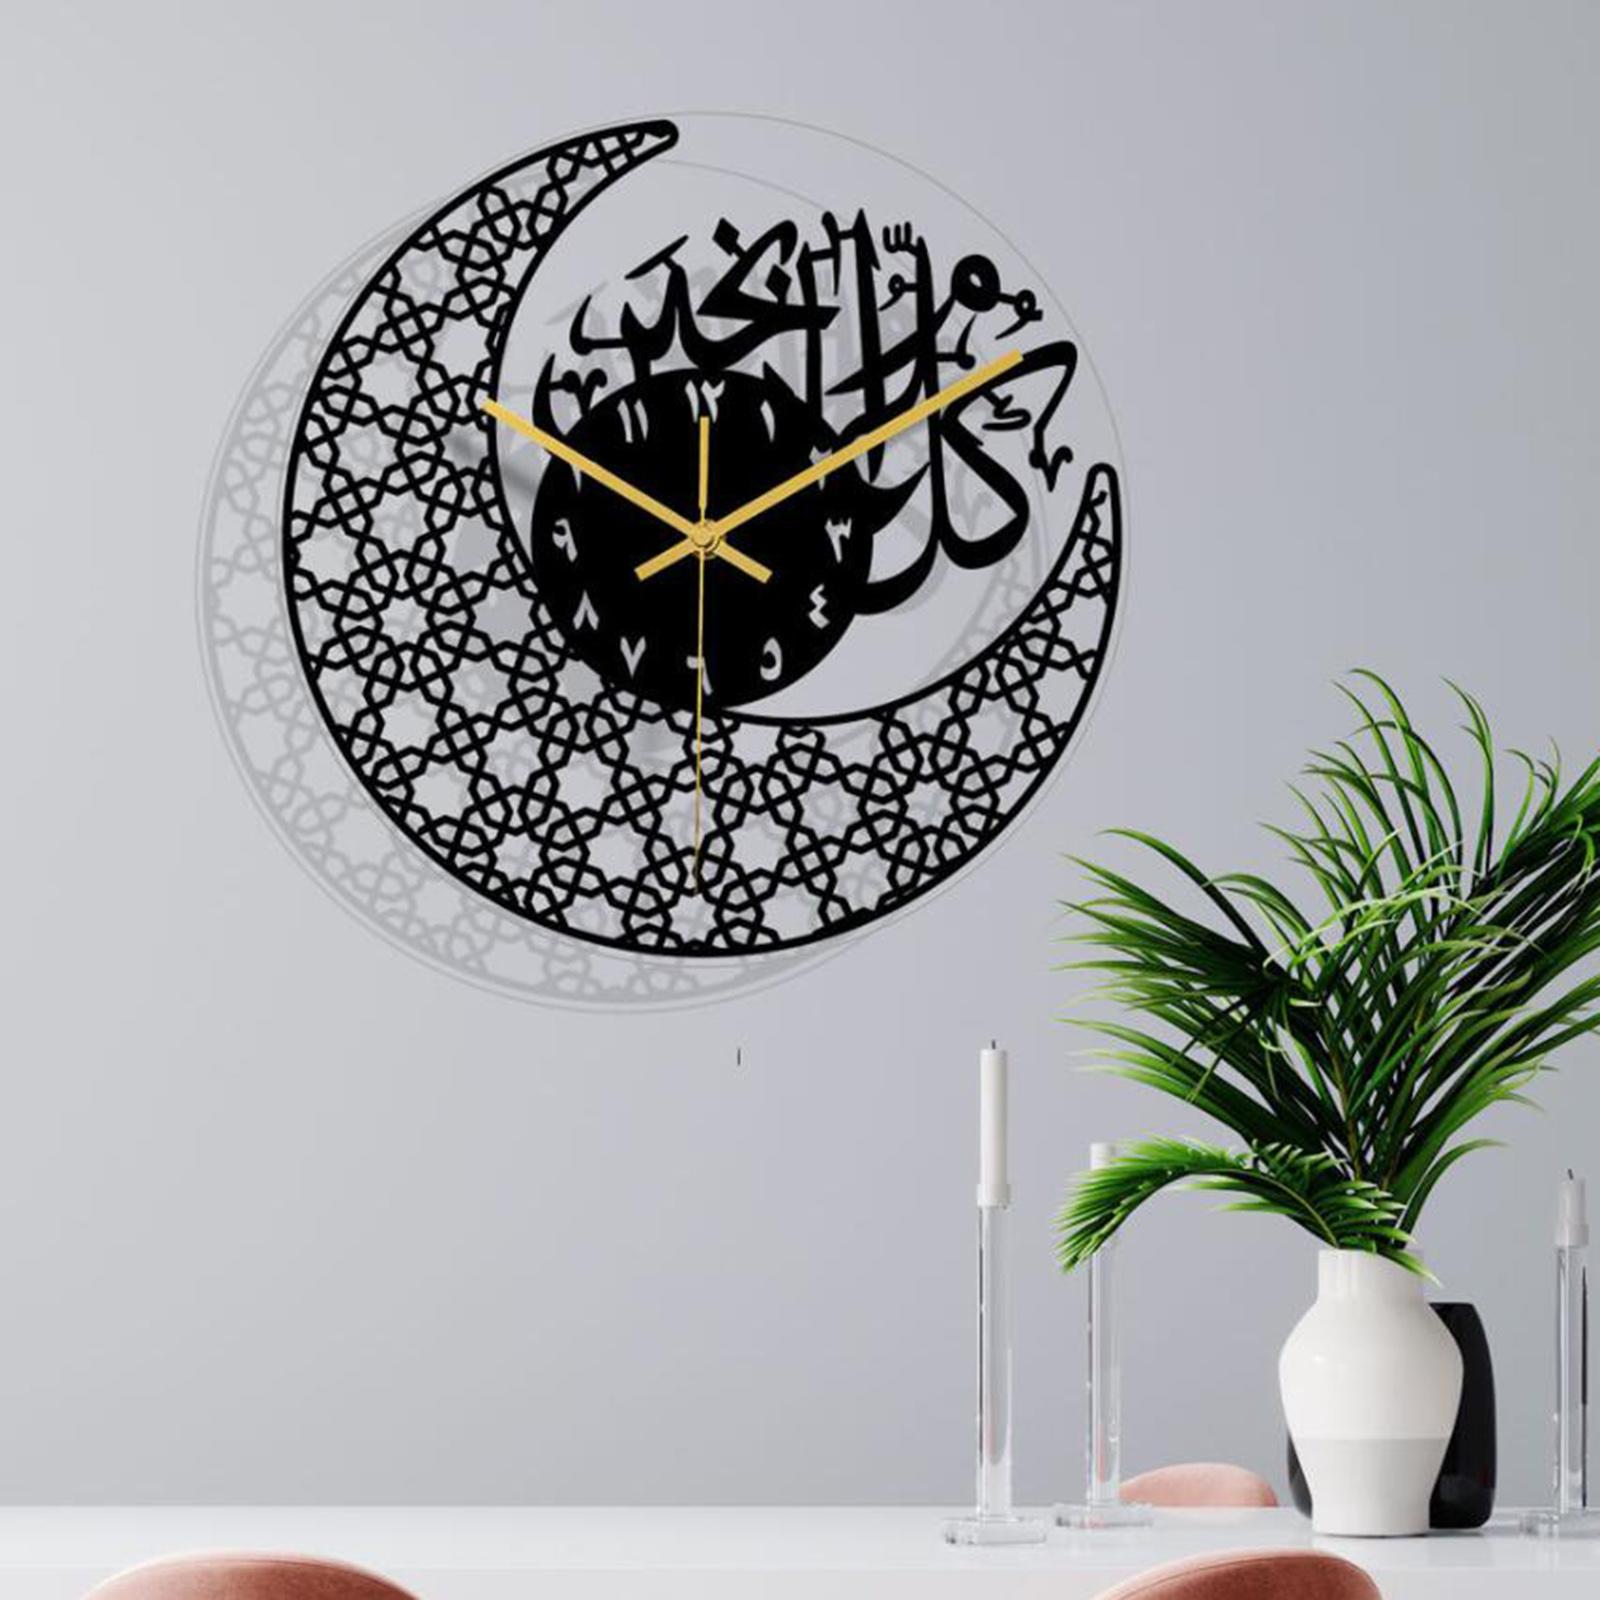 Islamic Calligraphy Wall Clock Silent Decorative for Home Kitchen Wall Decor Black